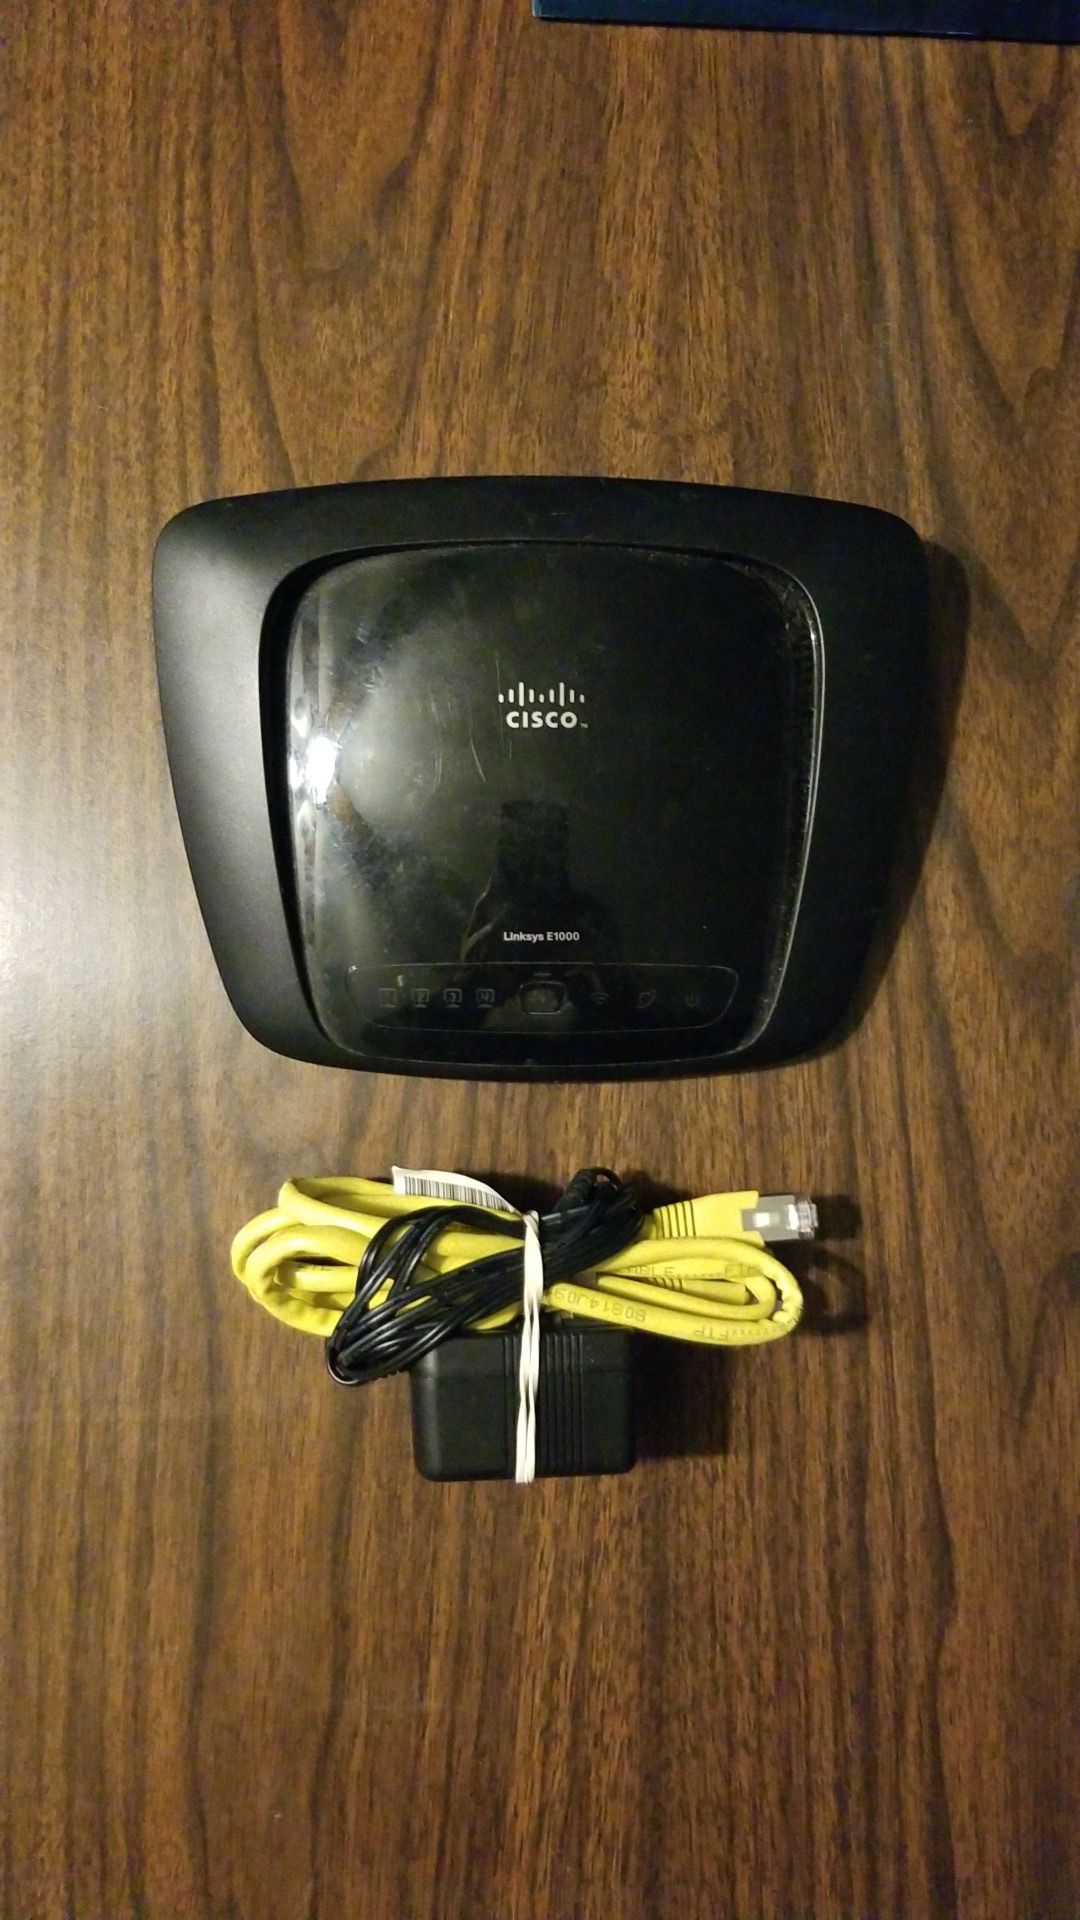 Cisco Linksys E1000 wireless router 300 Mbps 4 port 2.4 Ghz fast ethernet adapter